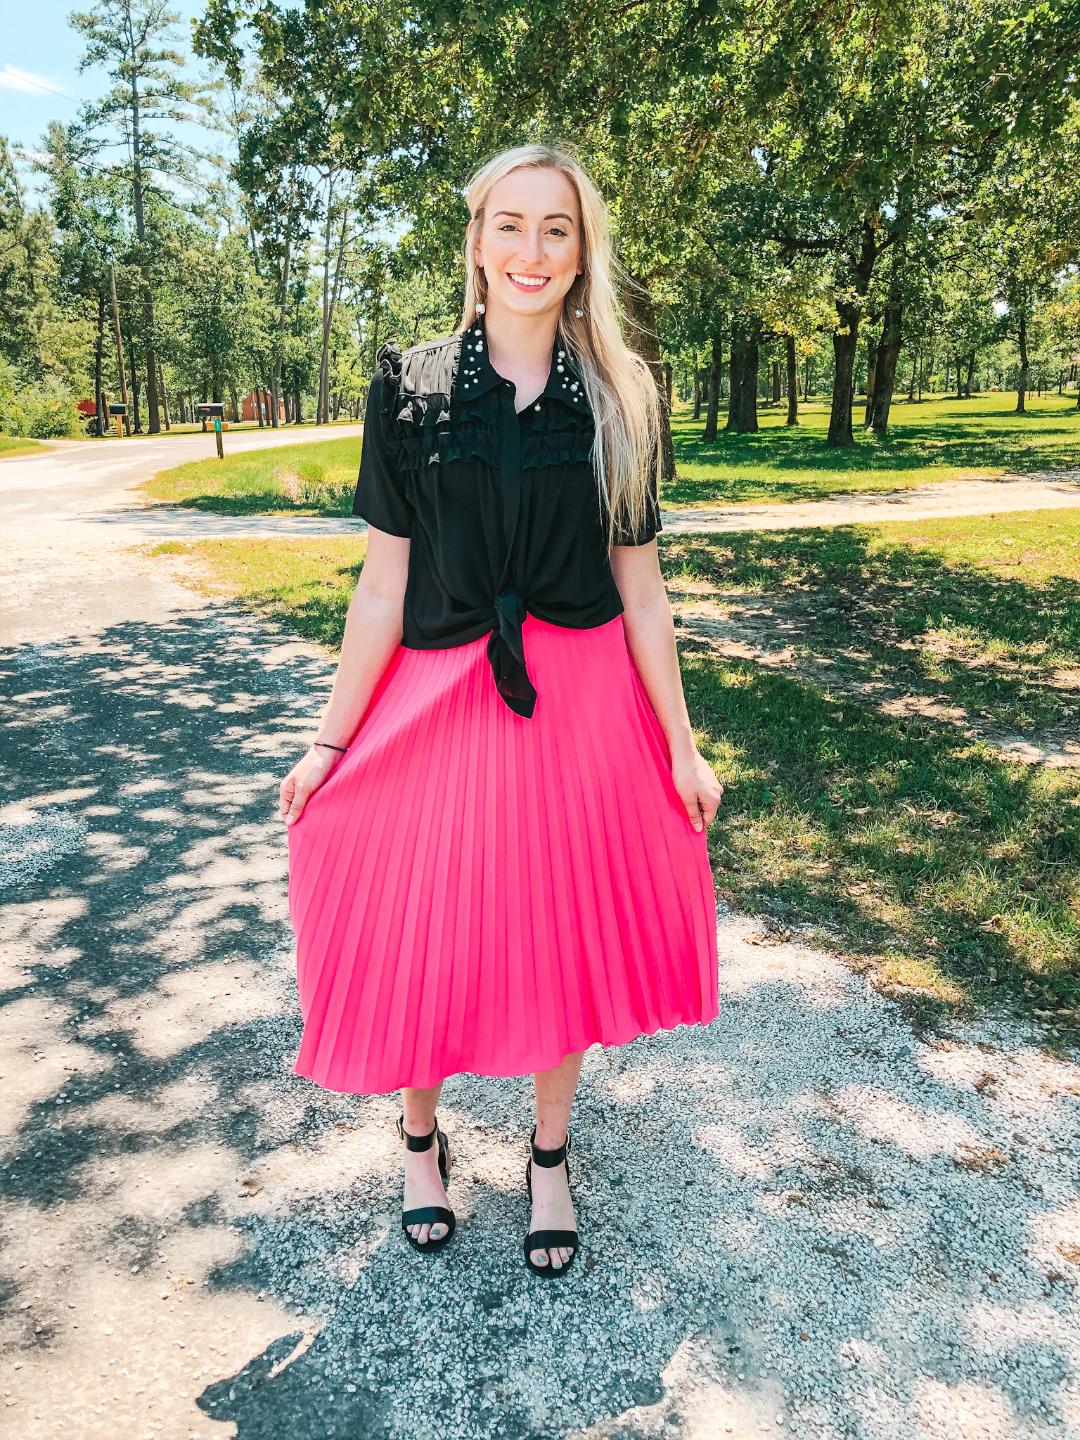 Reasons Why Pleated Midi Skirt in Fuchsia - Giddy Up Glamour Boutique